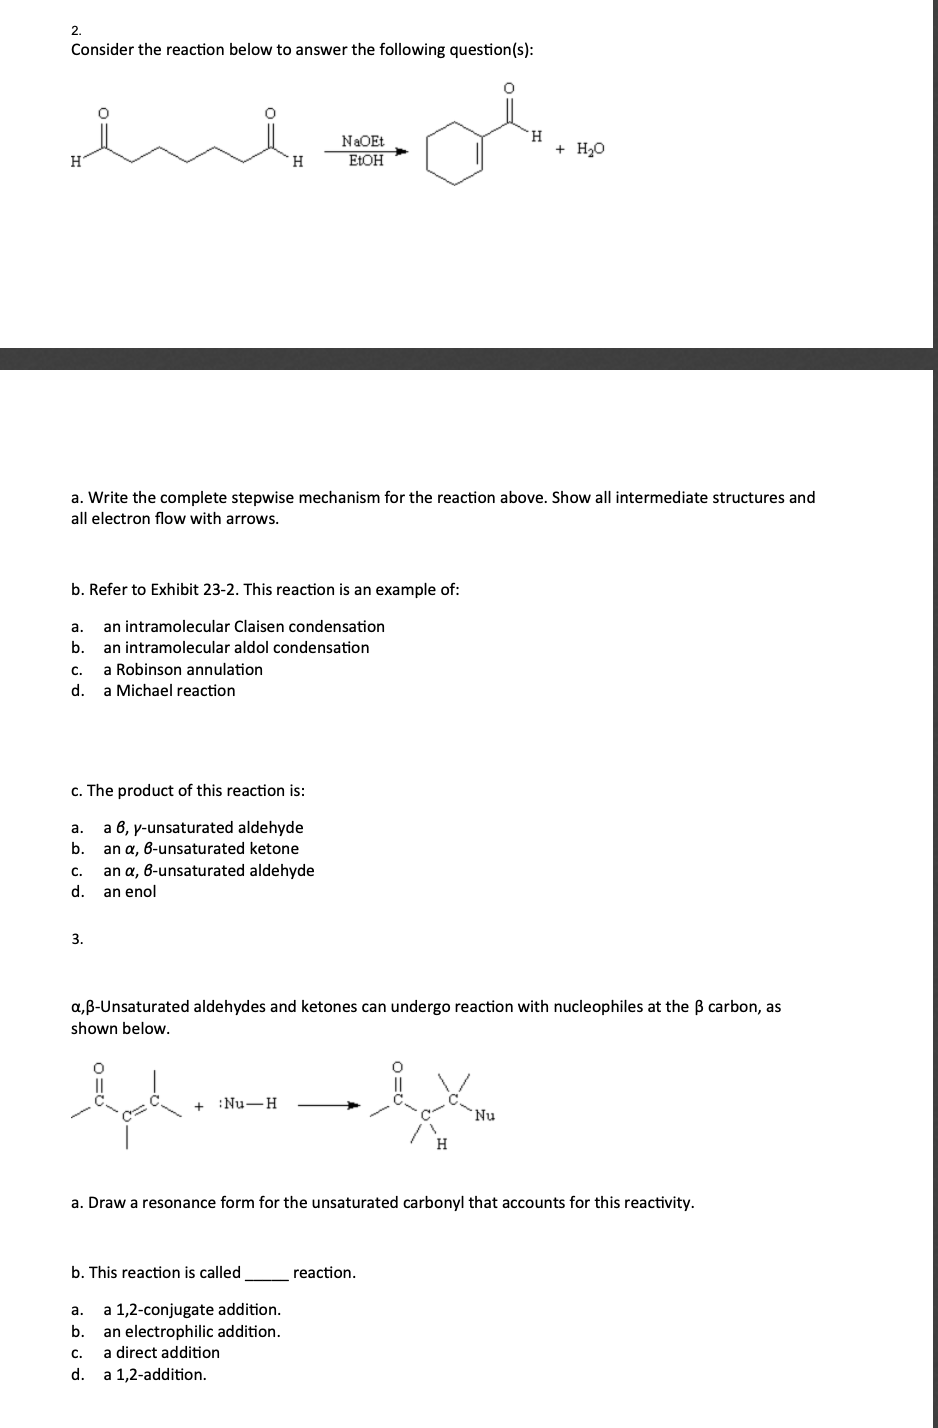 2.
Consider the reaction below to answer the following question(s):
H.
+ Но
NaOEt
H.
ELOH
a. Write the complete stepwise mechanism for the reaction above. Show all intermediate structures and
all electron flow with arrows.
b. Refer to Exhibit 23-2. This reaction is an example of:
а.
an intramolecular Claisen condensation
b.
an intramolecular aldol condensation
с.
a Robinson annulation
d.
a Michael reaction
c. The product of this reaction is:
a 6, y-unsaturated aldehyde
an a, 6-unsaturated ketone
an a, 6-unsaturated aldehyde
а.
b.
C.
d.
an enol
3.
a,B-Unsaturated aldehydes and ketones can undergo reaction with nucleophiles at the B carbon, as
shown below.
:Nu-H
Nu
a. Draw a resonance form for the unsaturated carbonyl that accounts for this reactivity.
b. This reaction is called
reaction.
a 1,2-conjugate addition.
an electrophilic addition.
a direct addition
a.
b.
с.
d.
a 1,2-addition.
